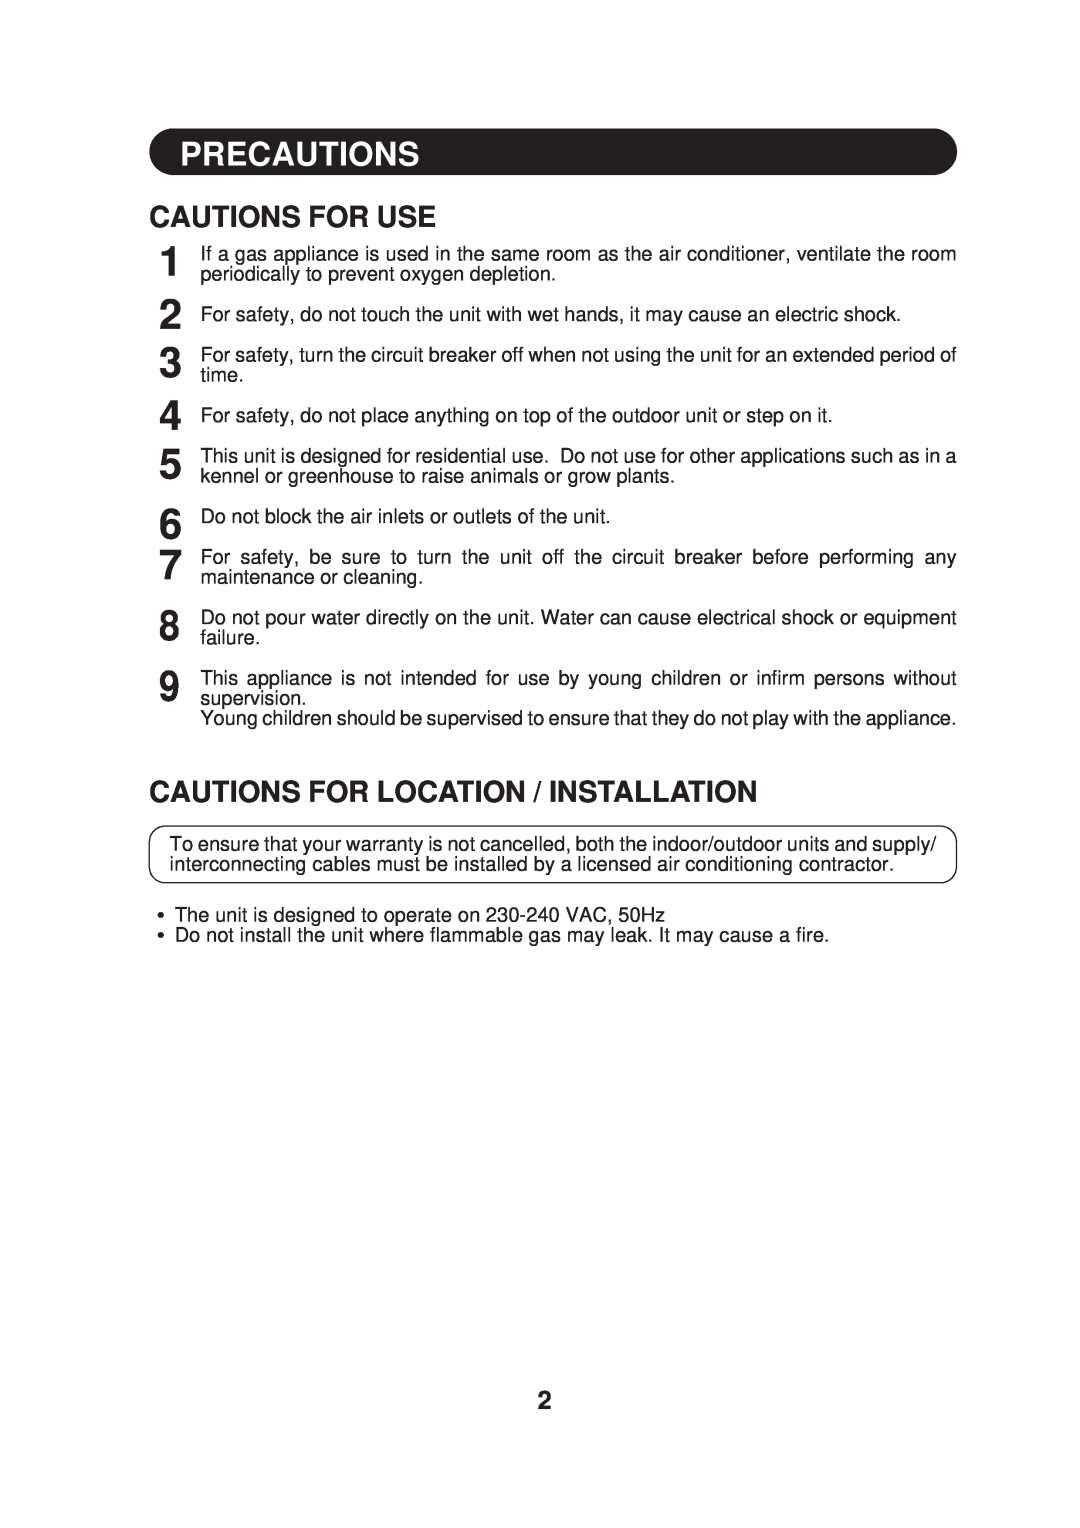 Sharp AY-AP09DJ, AE-A09DJ operation manual Cautions For Use, Cautions For Location / Installation, Precautions 